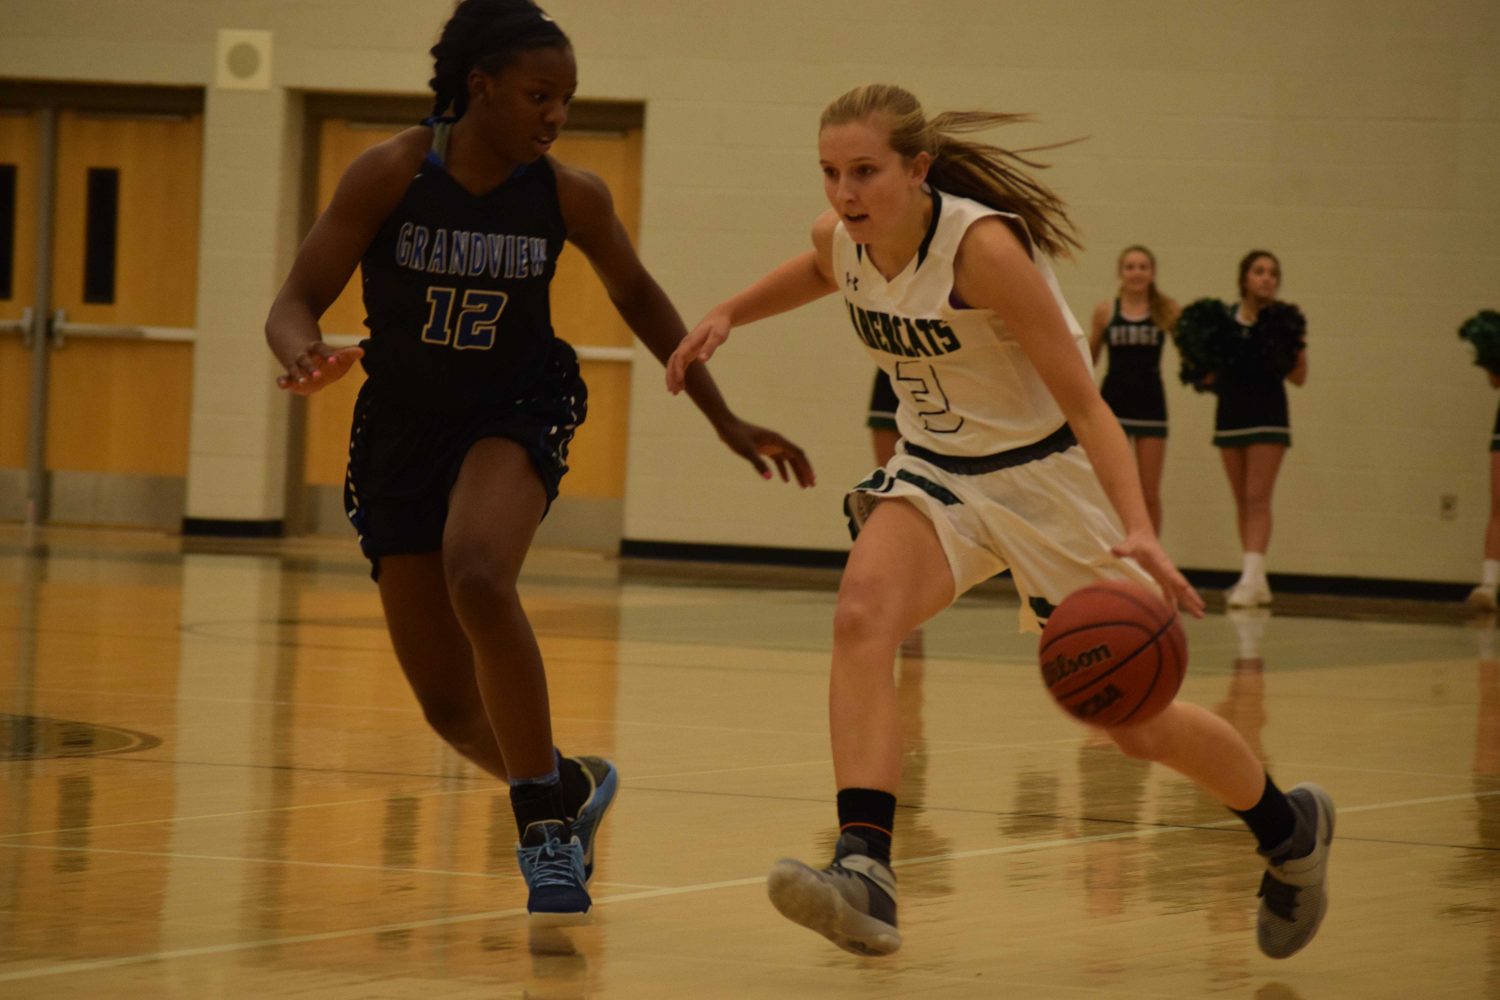 Ashley Steffeck takes on UCLA commit, Michaela Onyenwere from Grandview. Photo Credit: Haley Rockwell